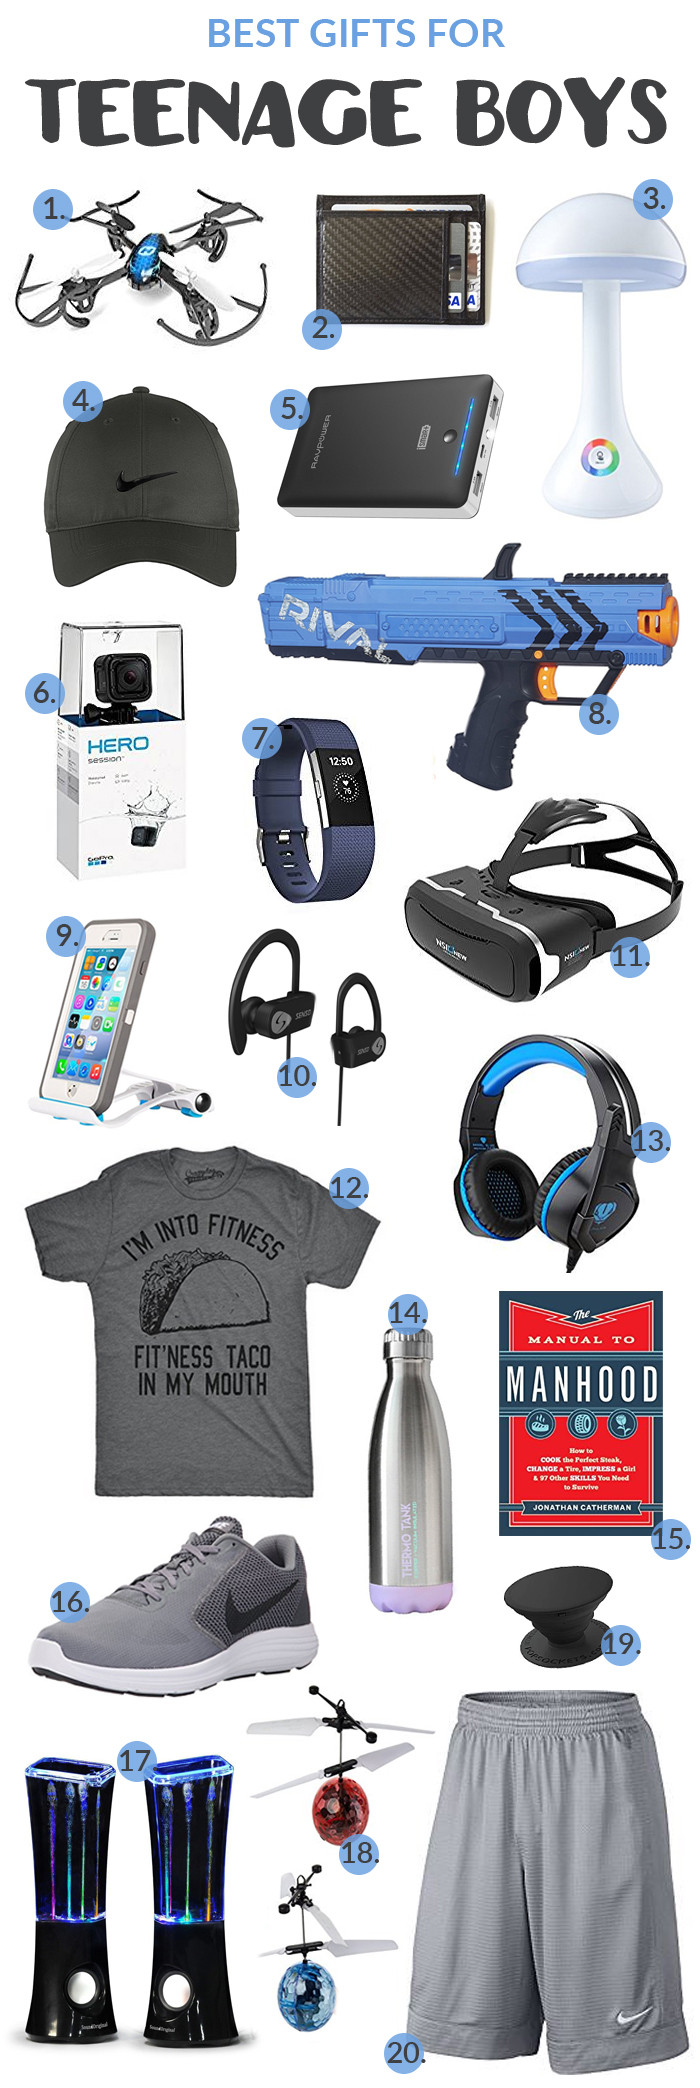 Best Gift Ideas For Boys
 Best Gifts for Teenage Boys